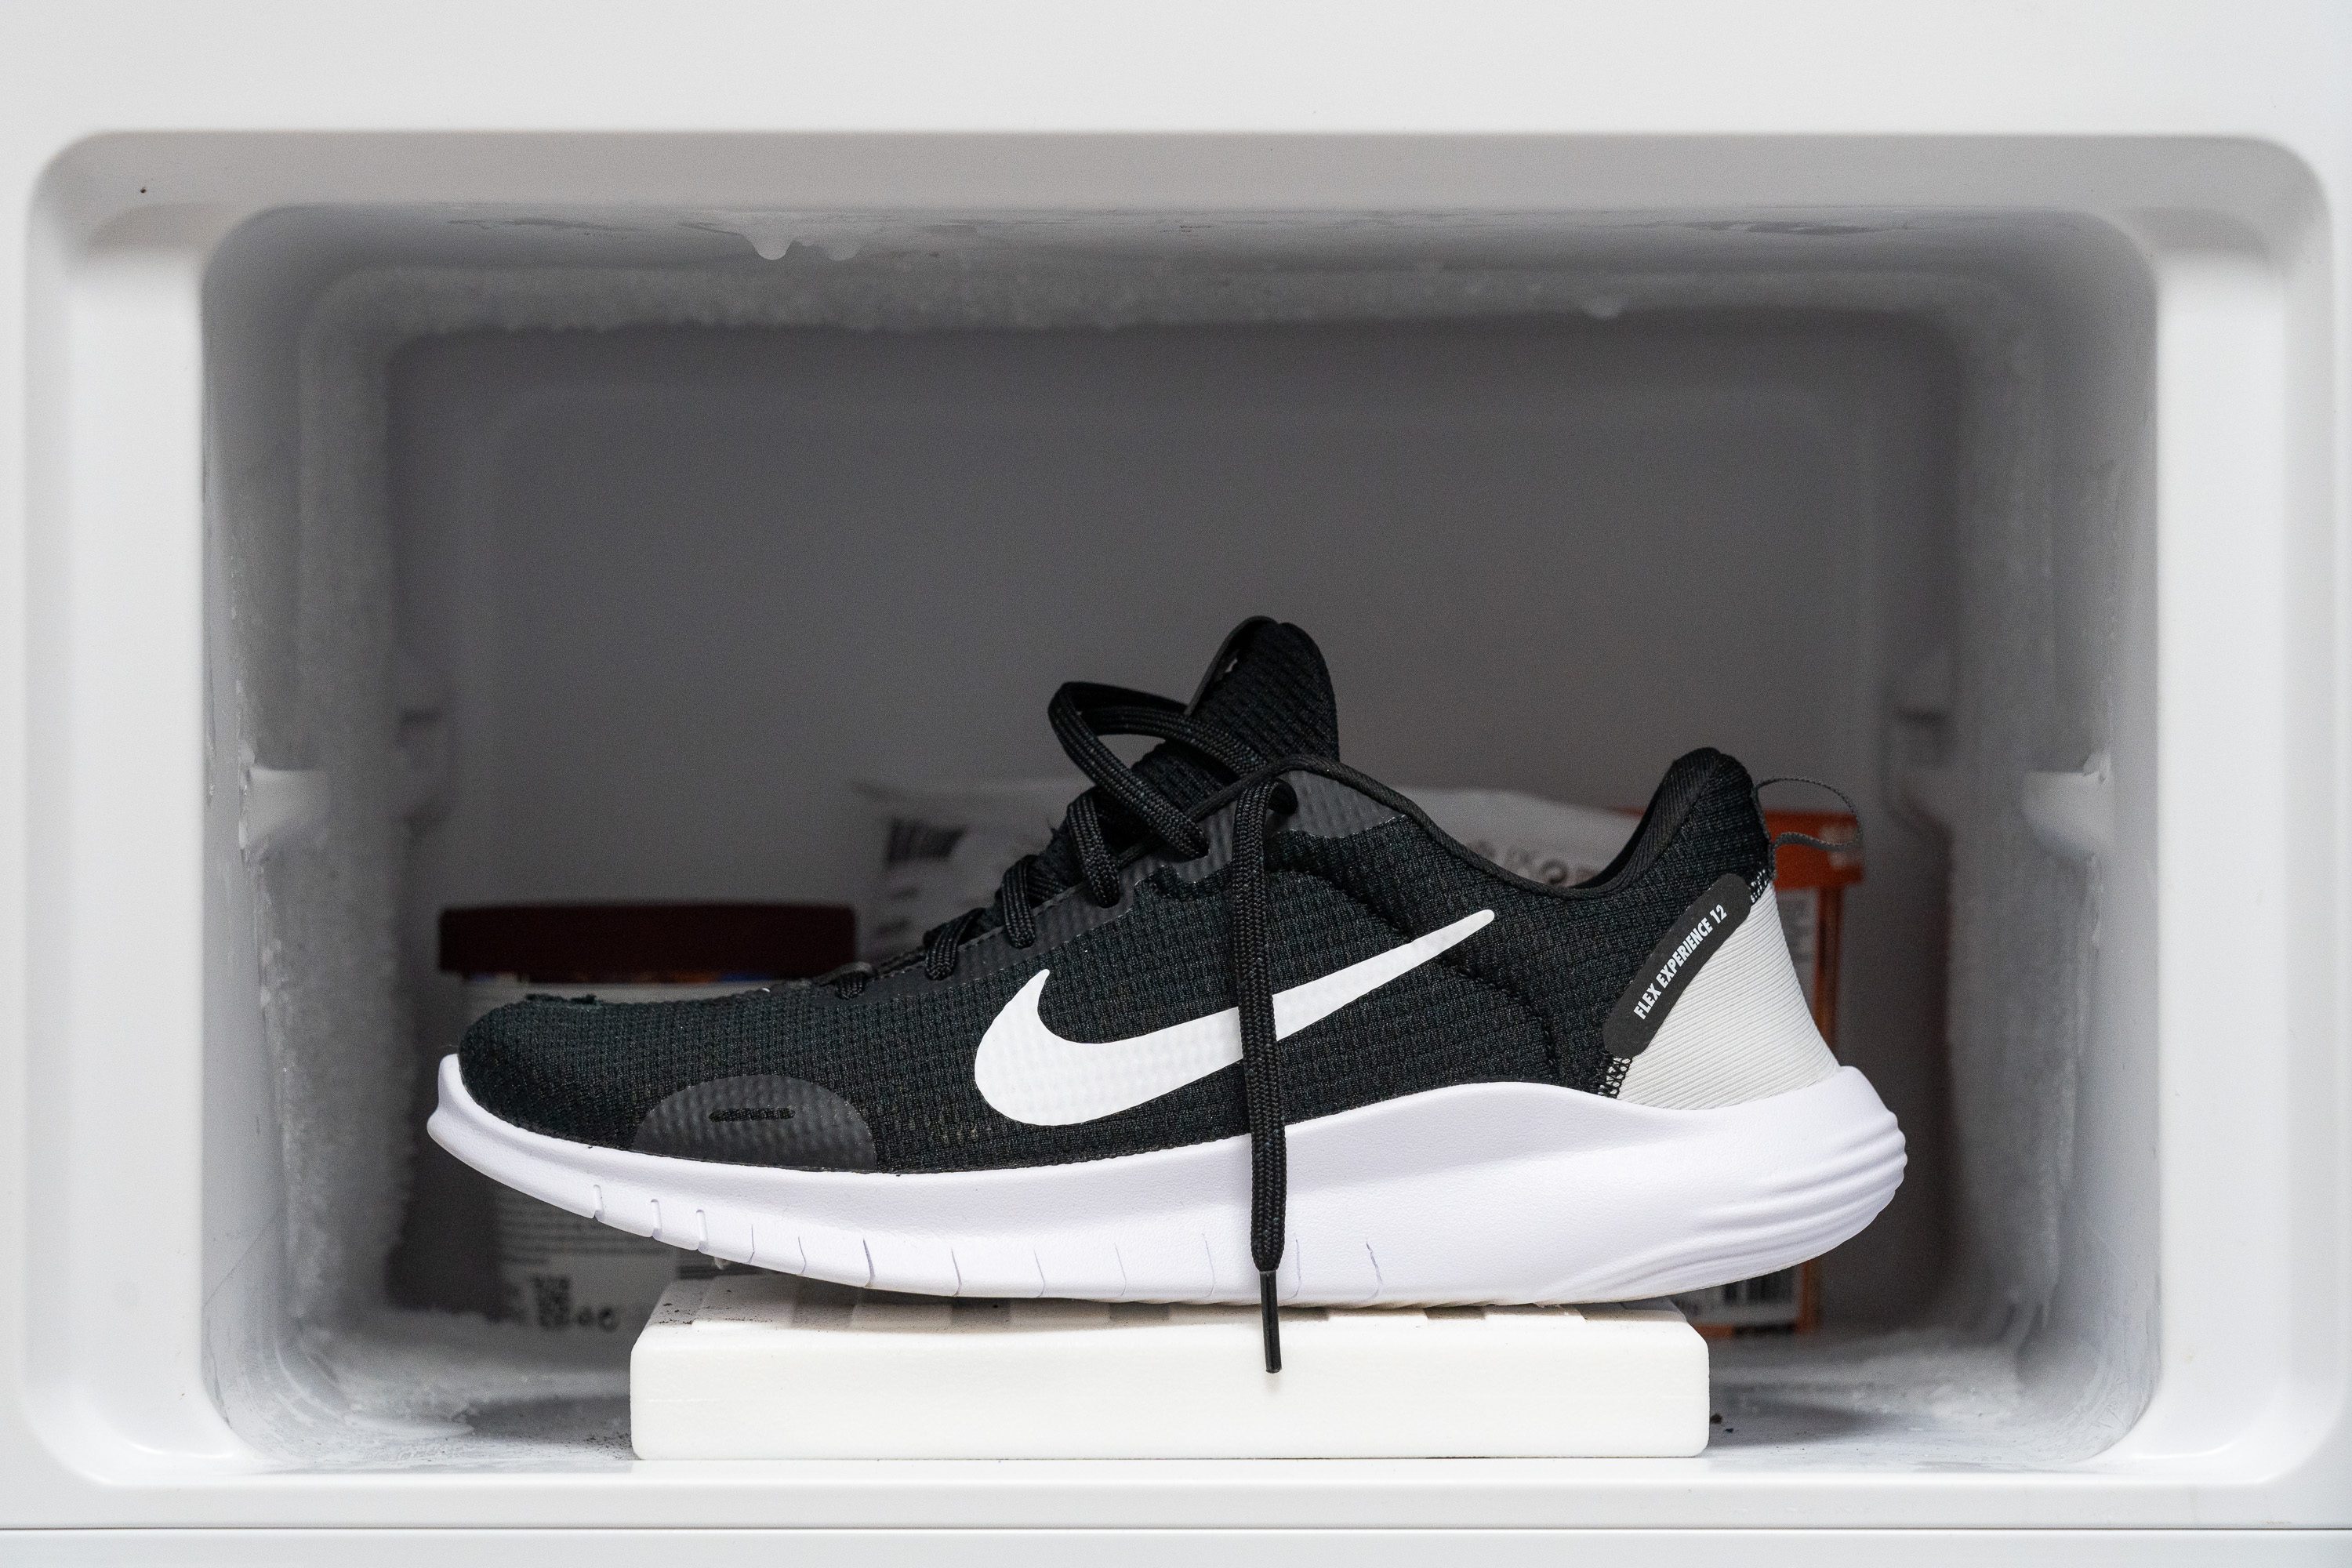 nike flex experience run 12 difference in midsole softness in cold 21229950 main